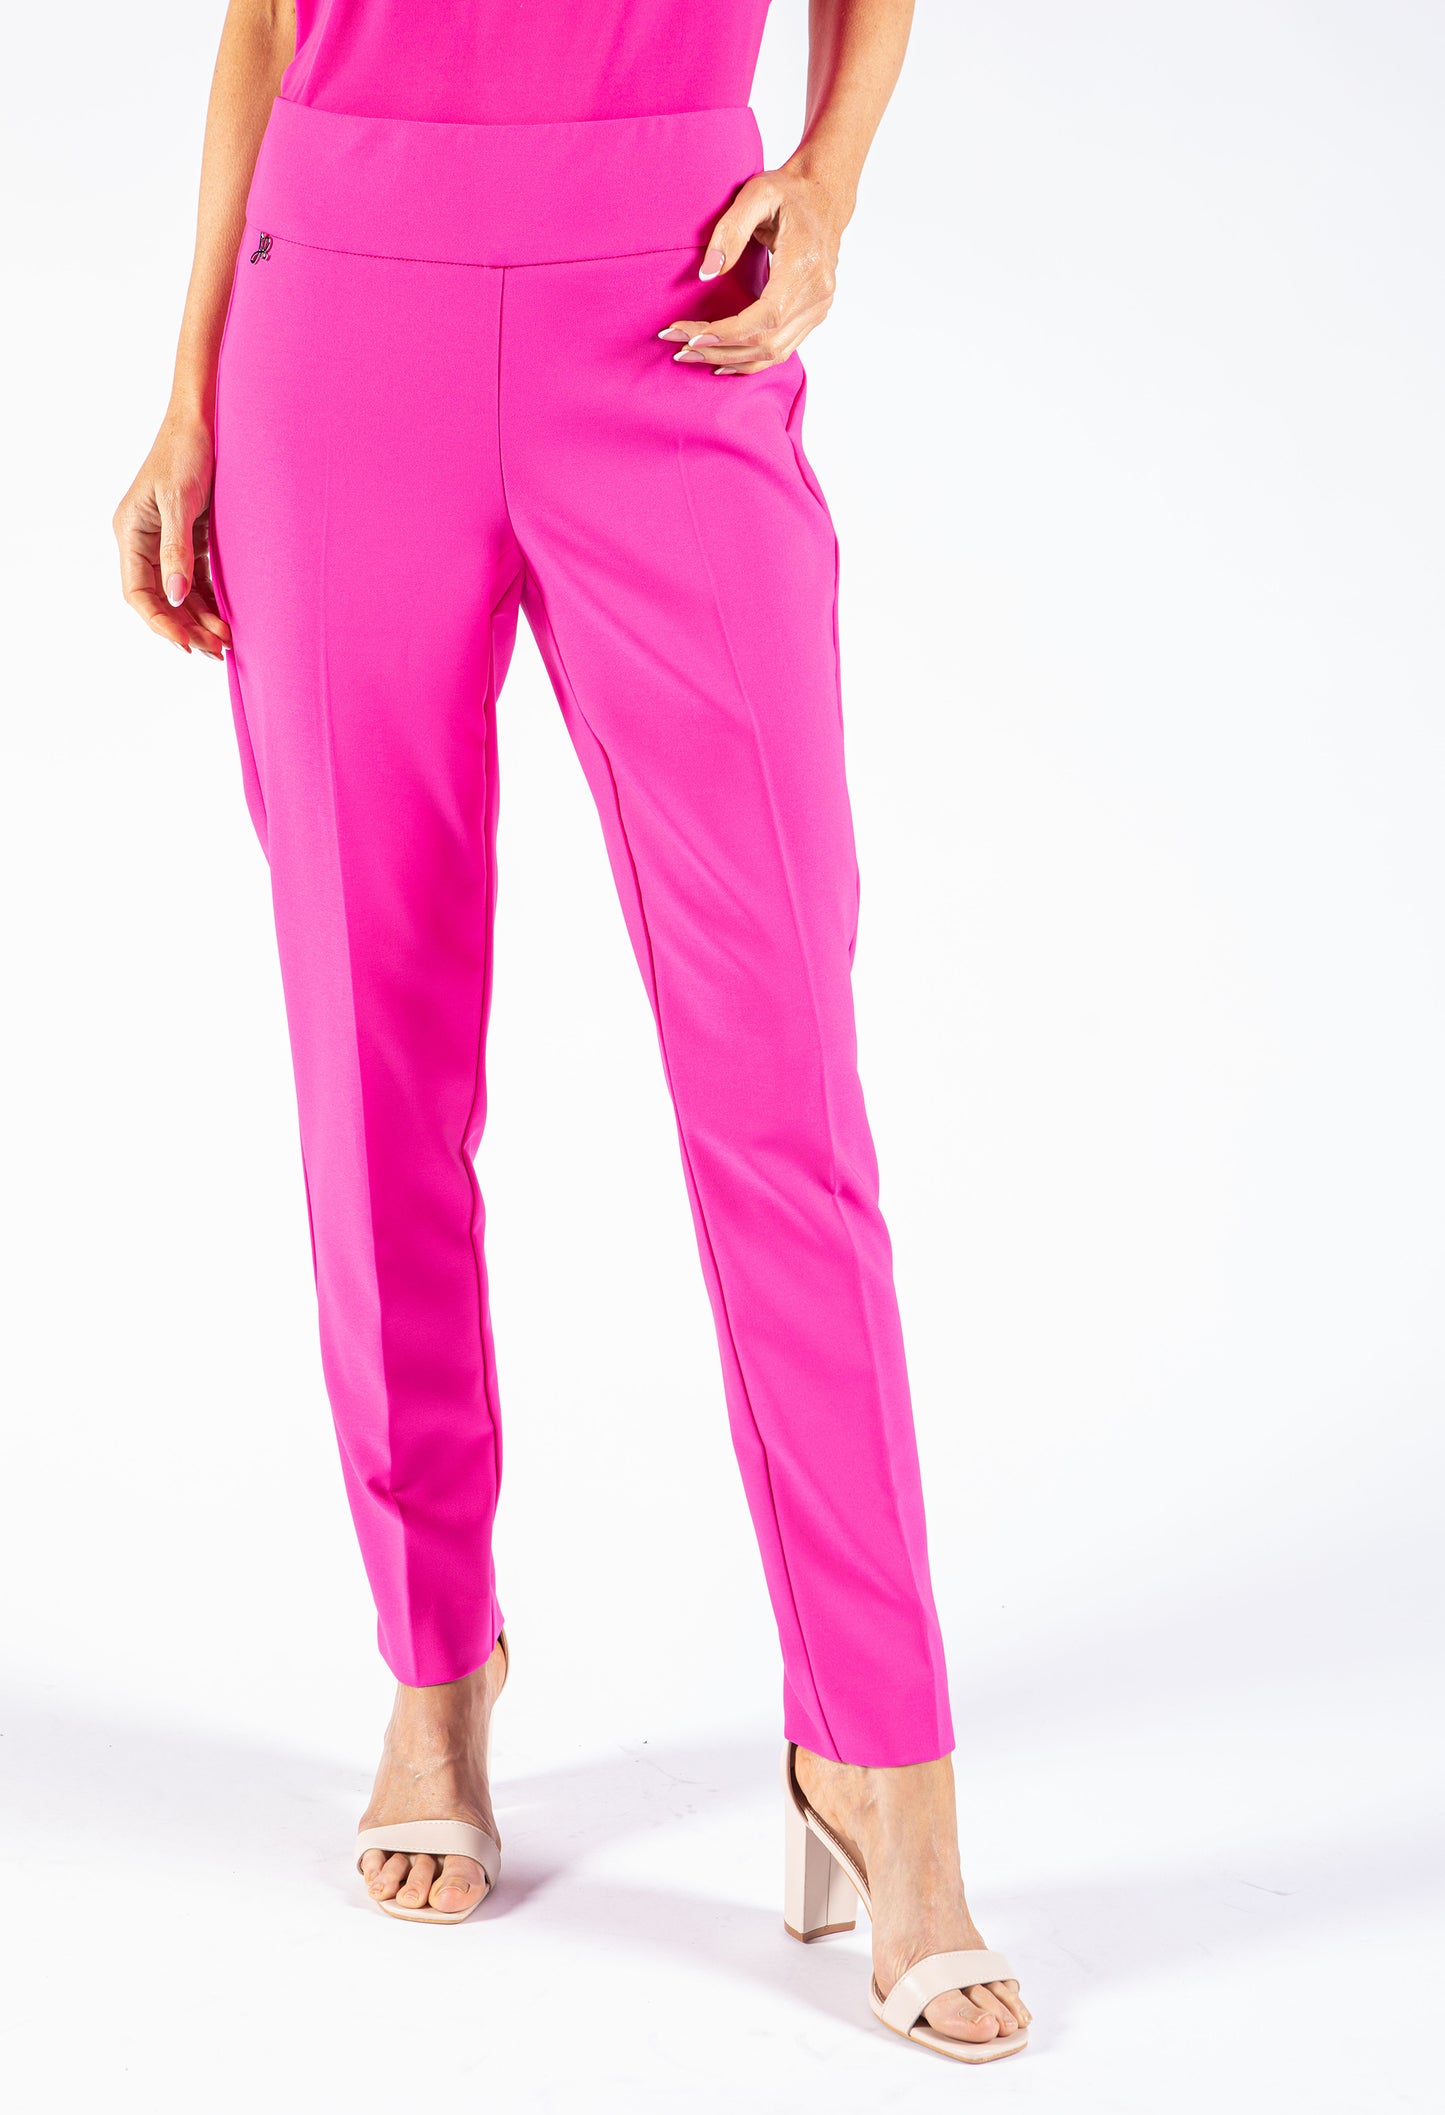 Cropped Pleated Pants